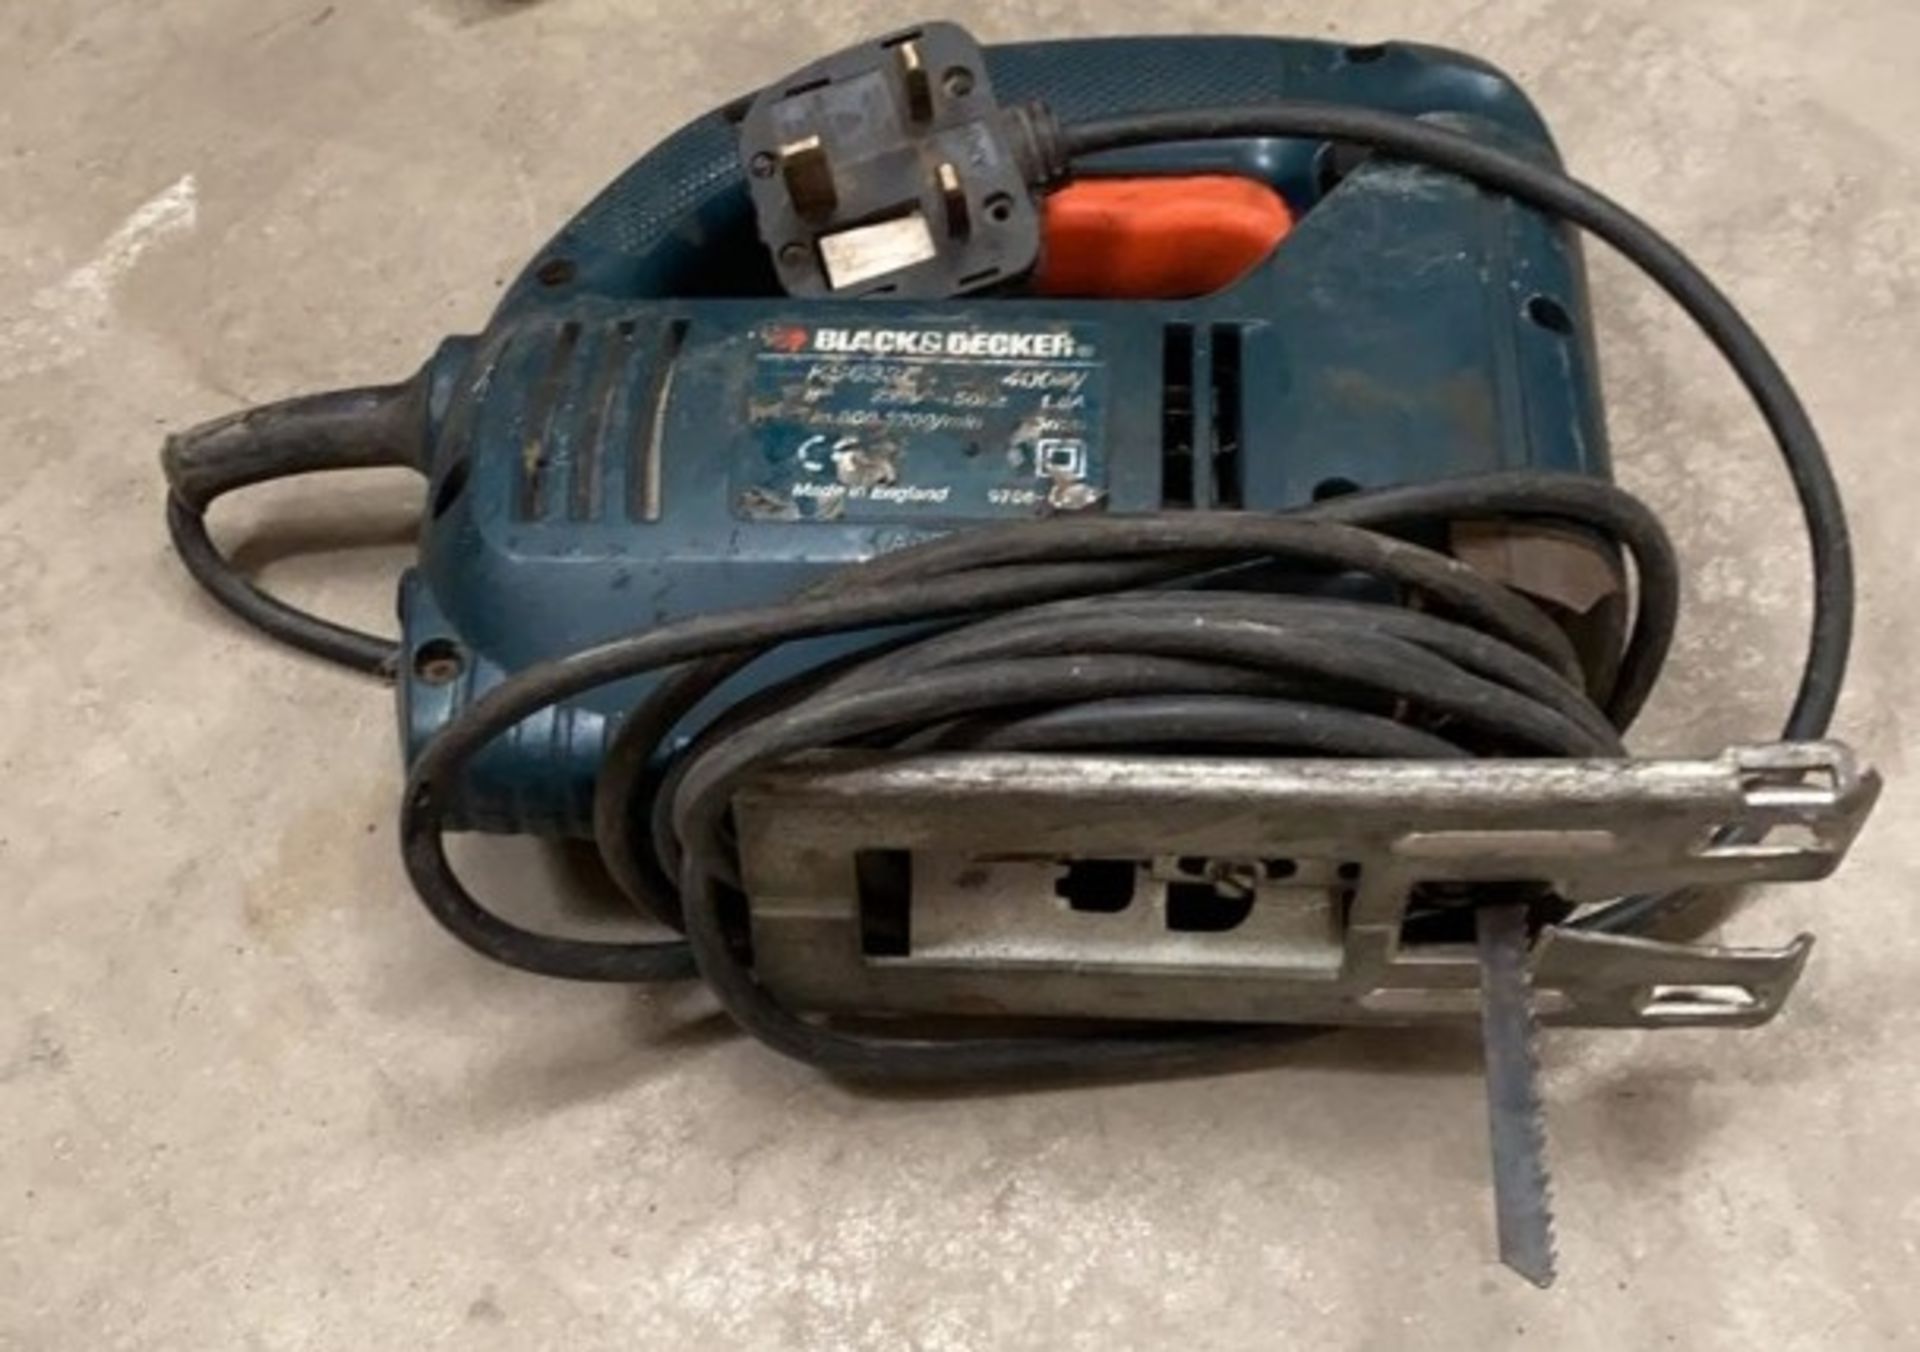 1 x Black and Decker Jig Saw - Used, Recently Removed From A Working Site - CL505 - Ref: TL023 - - Image 3 of 3